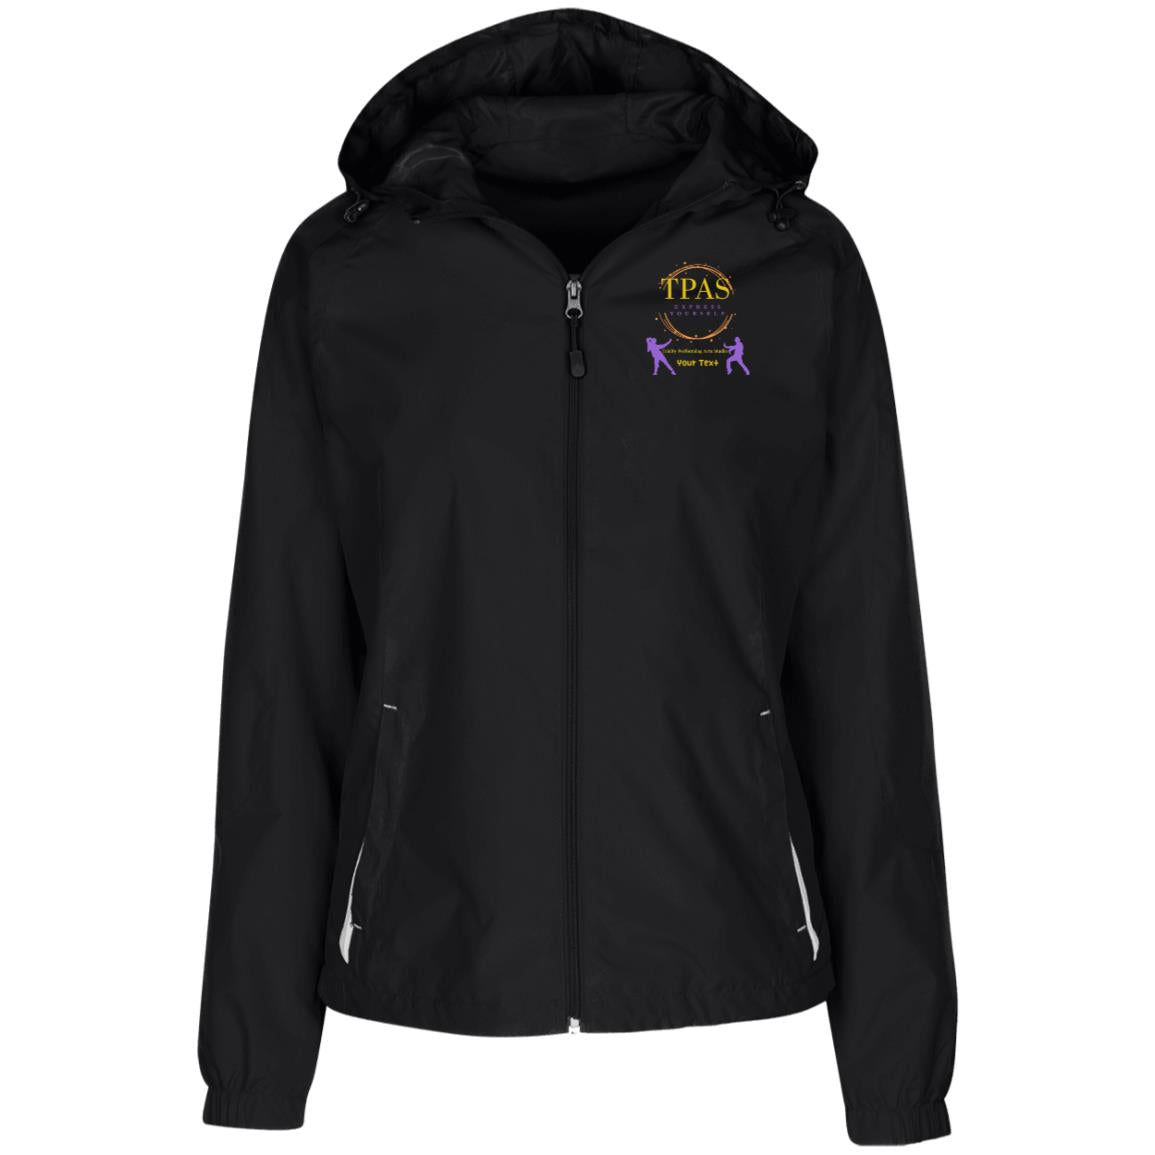 TPAS Competition Team Ladies' Jersey-Lined Hooded Windbreaker